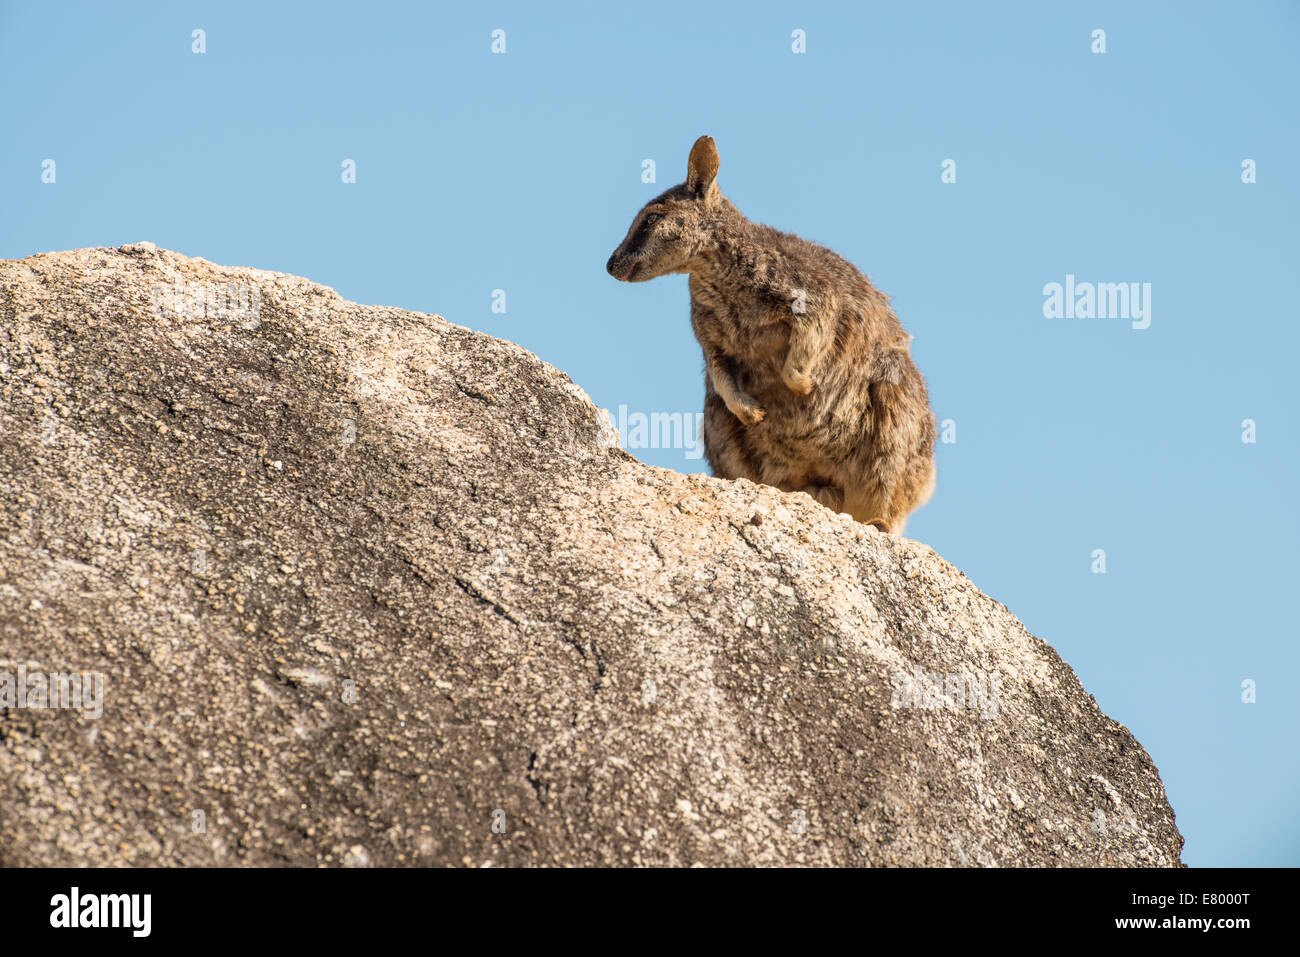 Stock photo of a Mareeba unadorned rock wallaby sitting on top of a boulder. Stock Photo